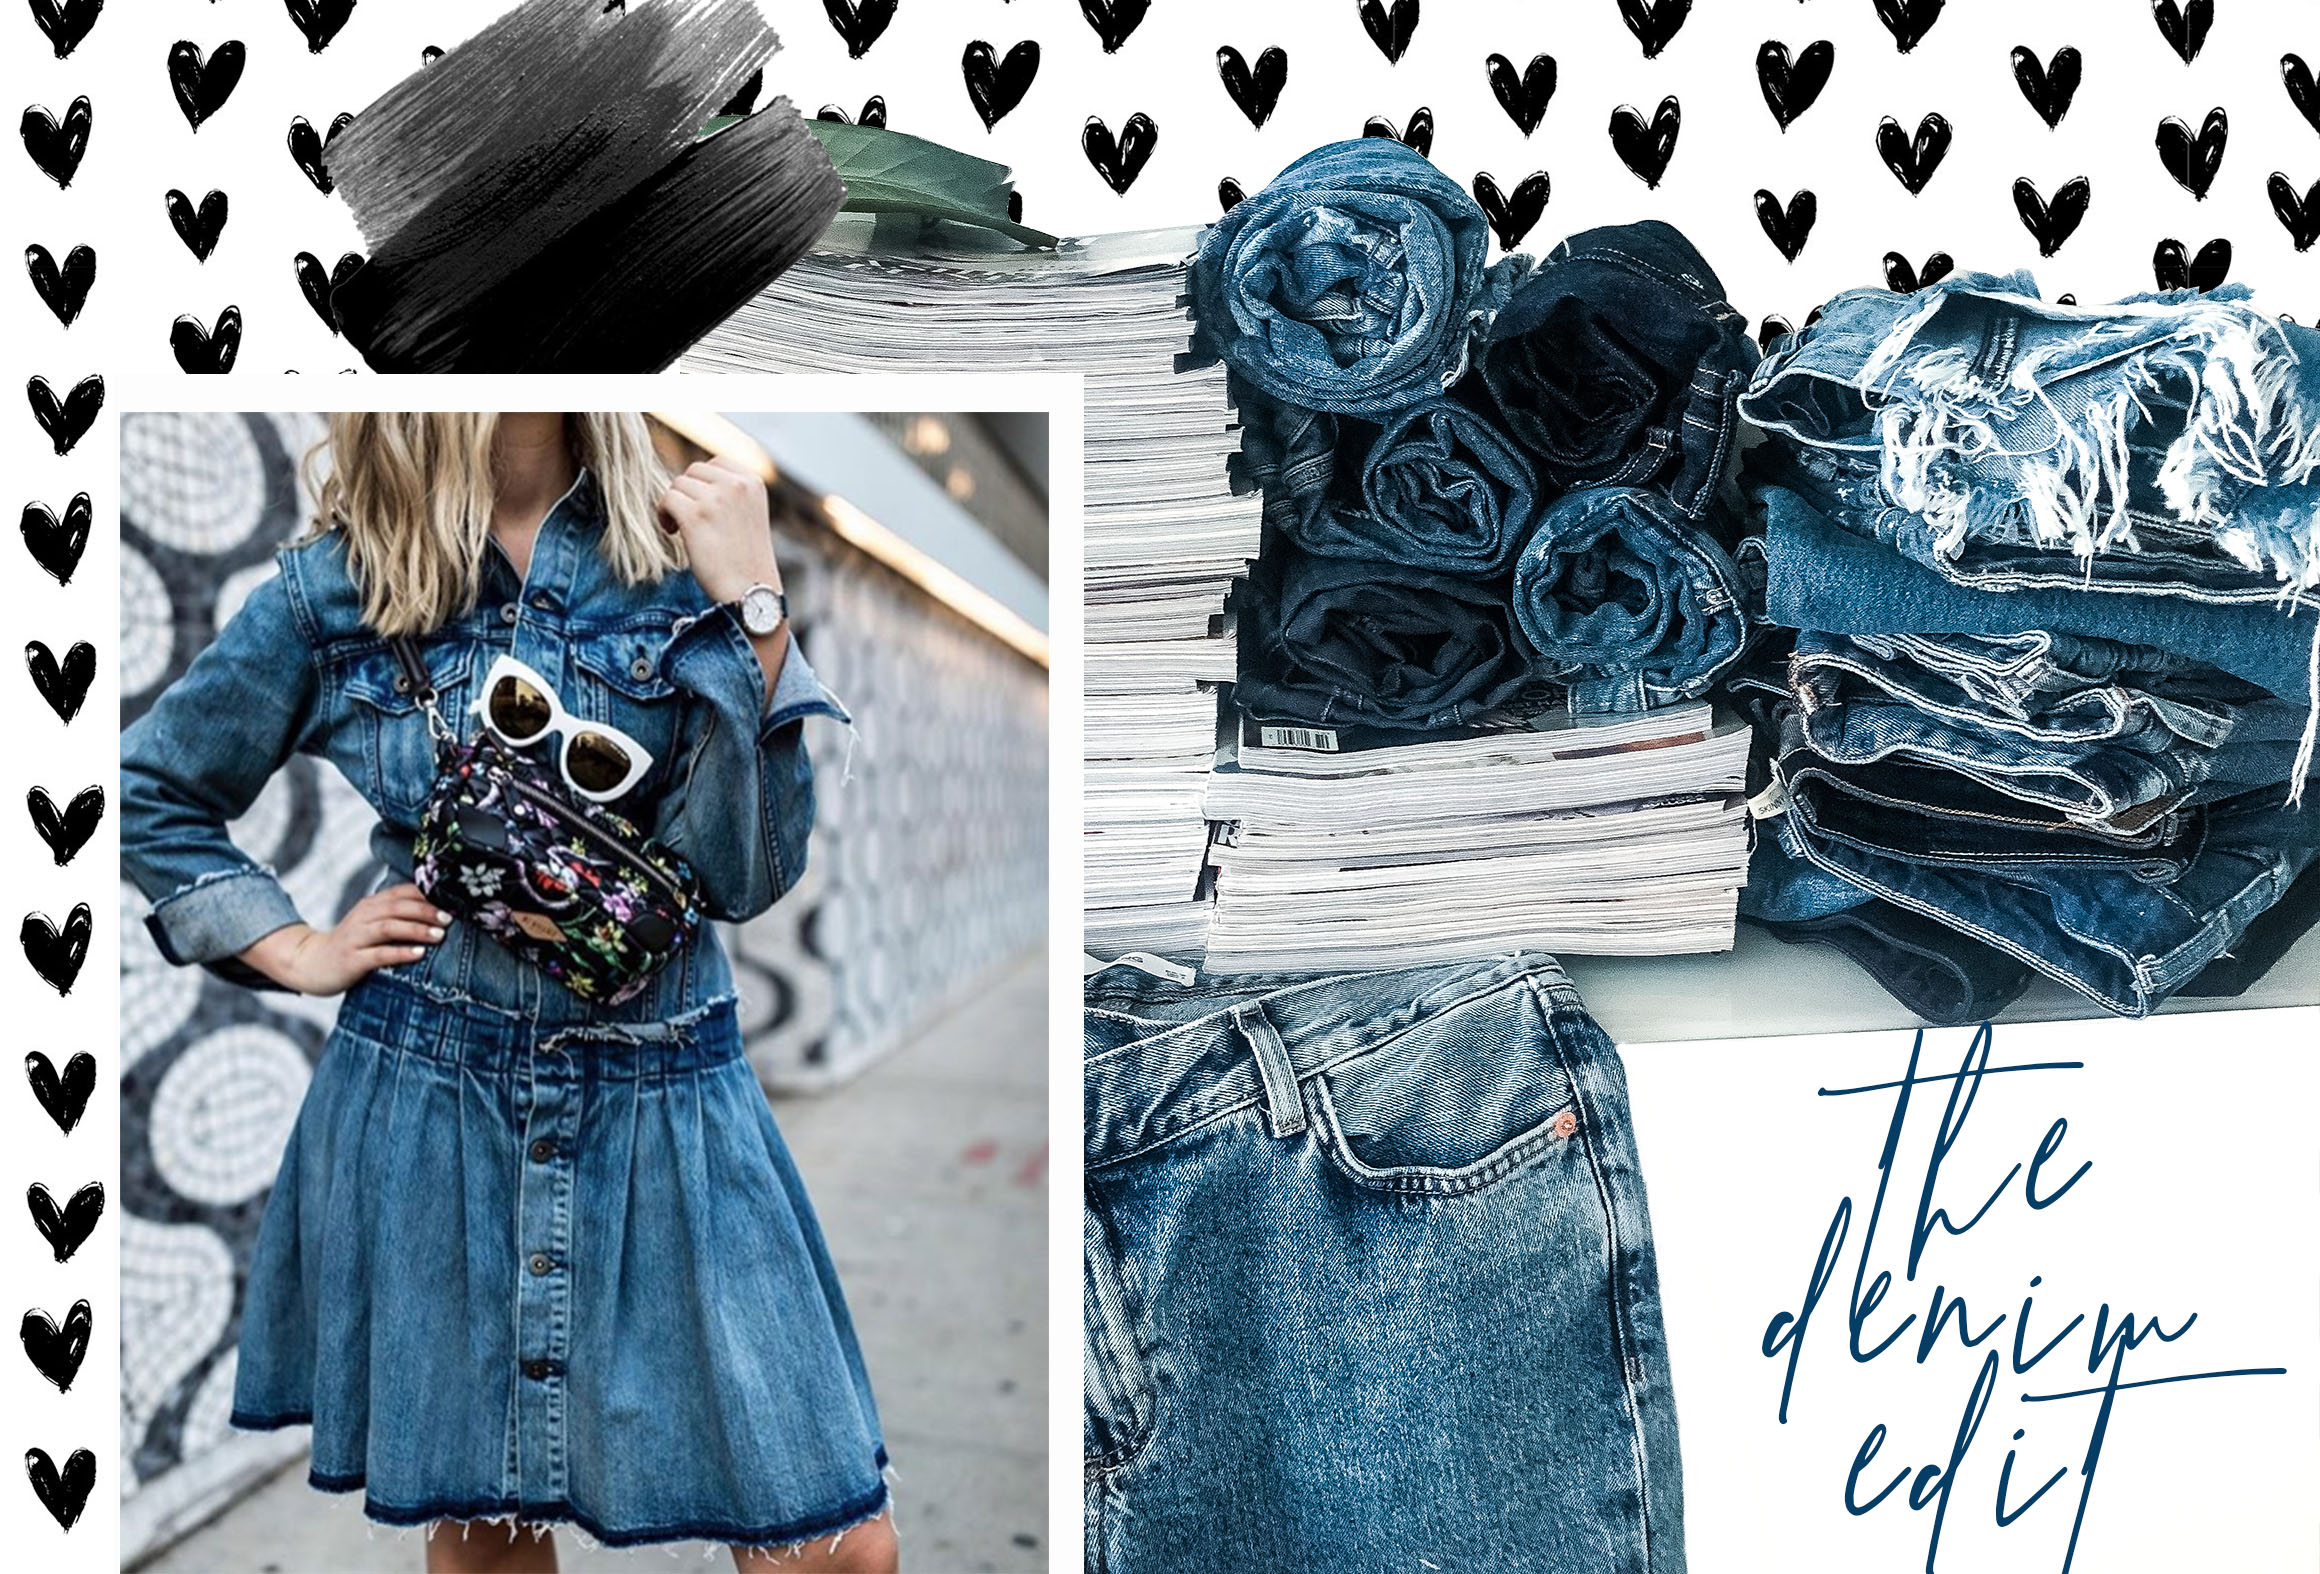 Merkoteks - InourSpring/Summer 22 collection moodboard, 'Embracing the  Nature' represents corevintage-lookdenim made with carefully chosen  responsible compositions #designerspick #merkoteks #sustainability #denim  #Jean #sustainableproduction | Facebook